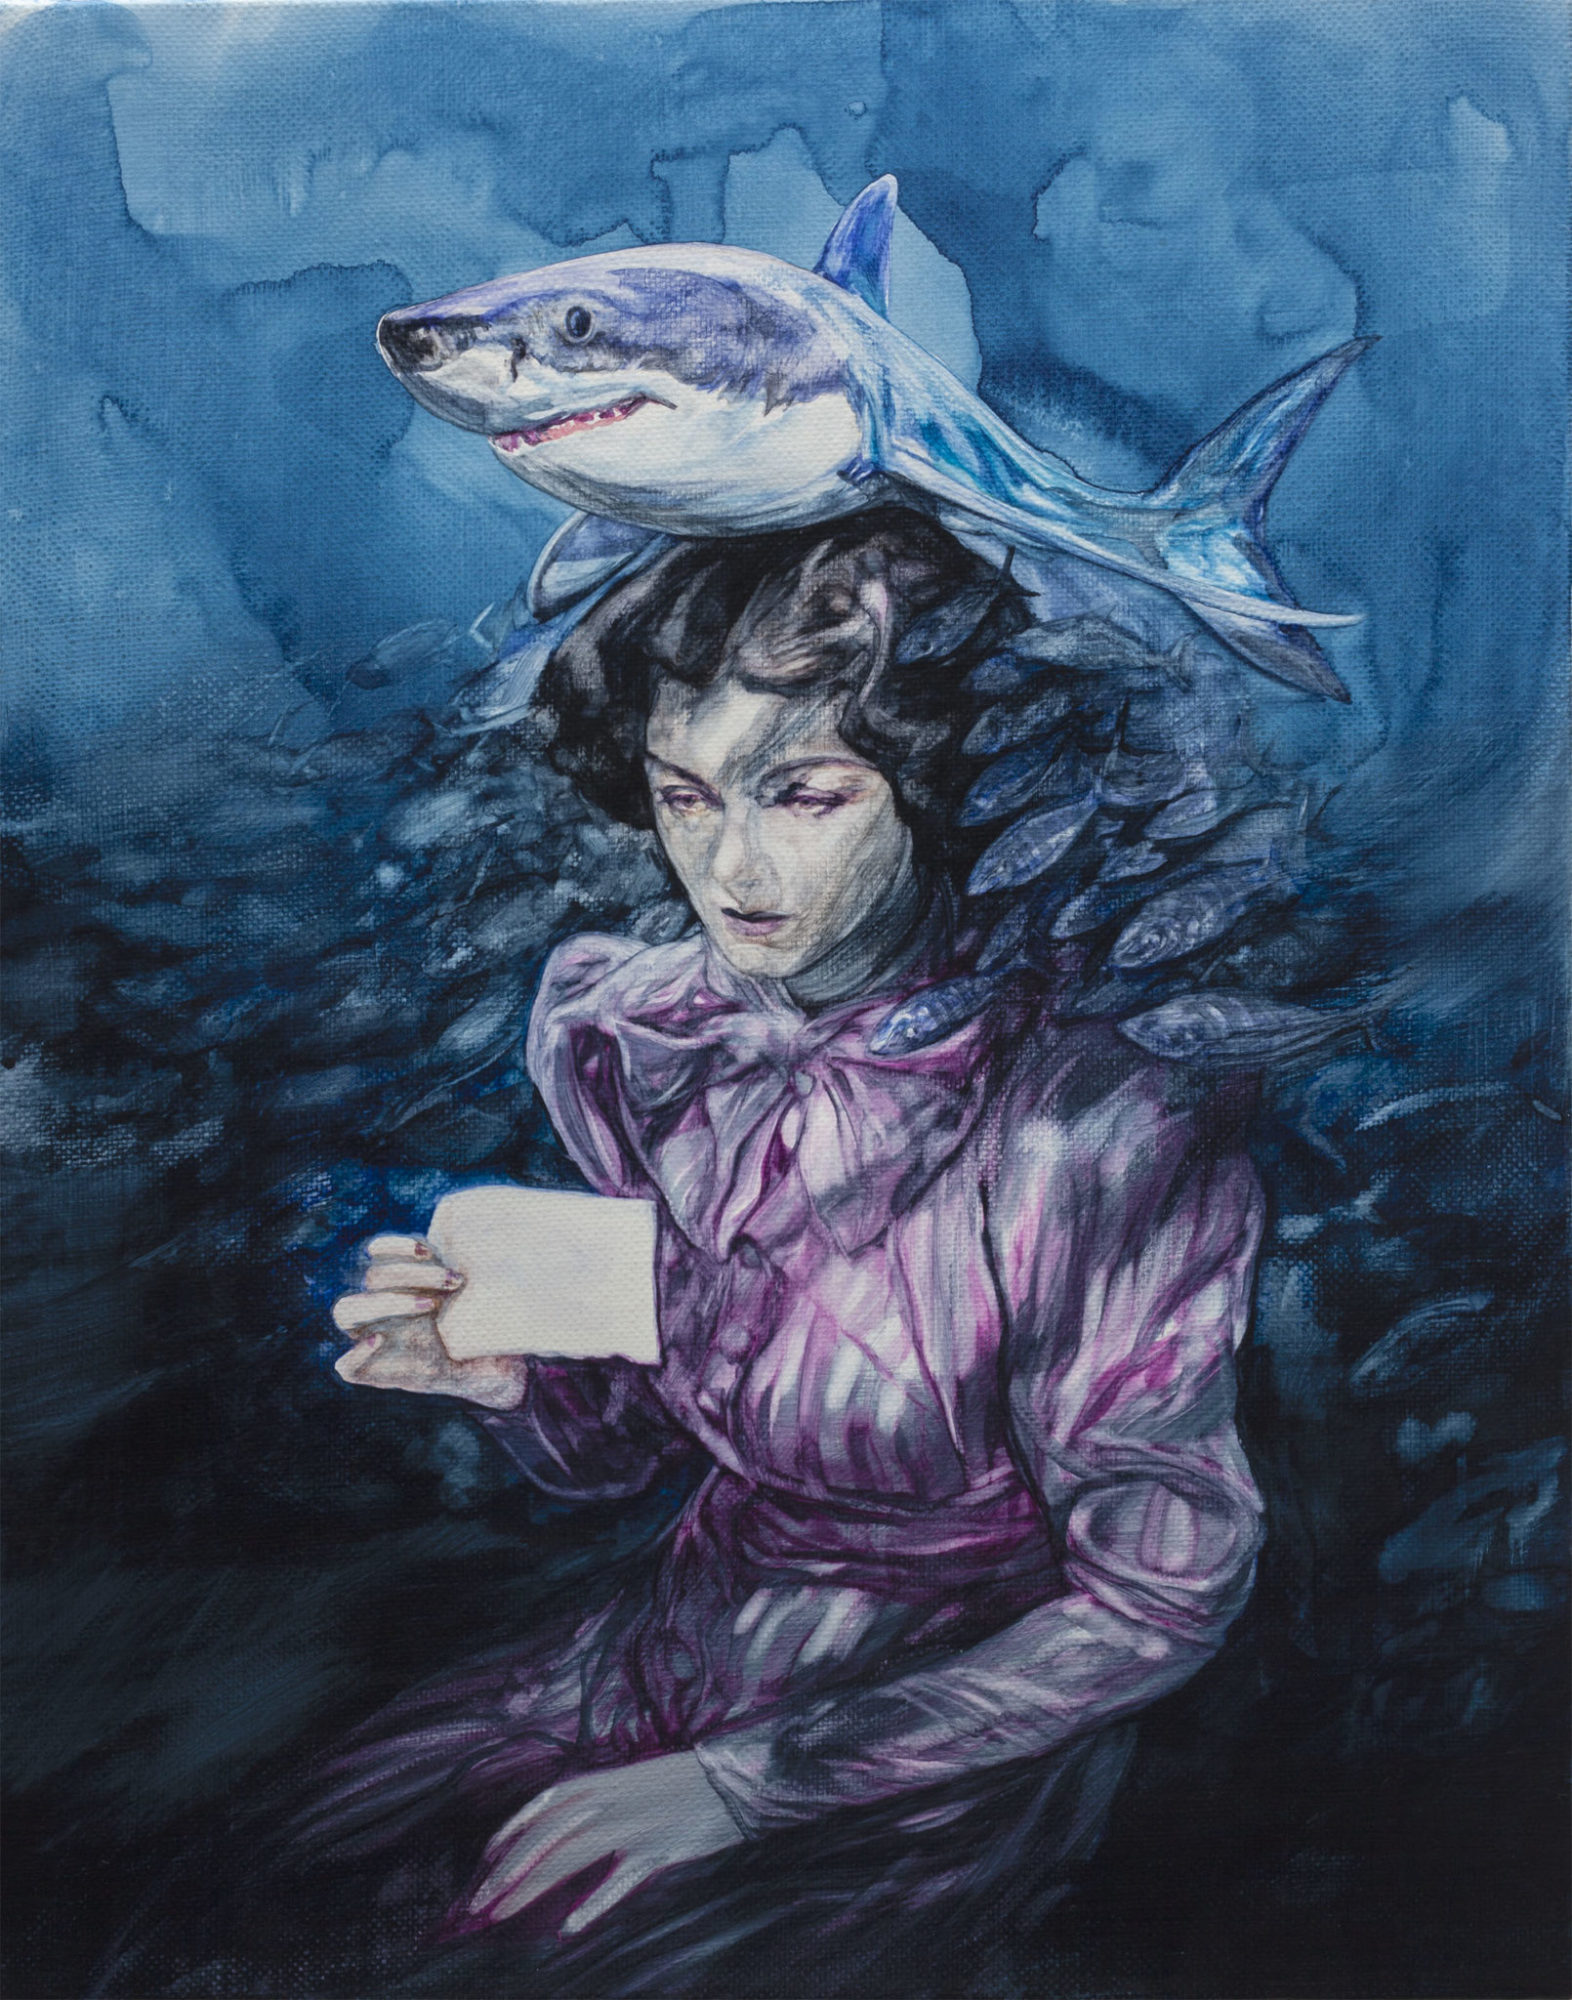 La dame au requin - Watercolor on canvas mounted on wood - 30 x 40 cm - 2020